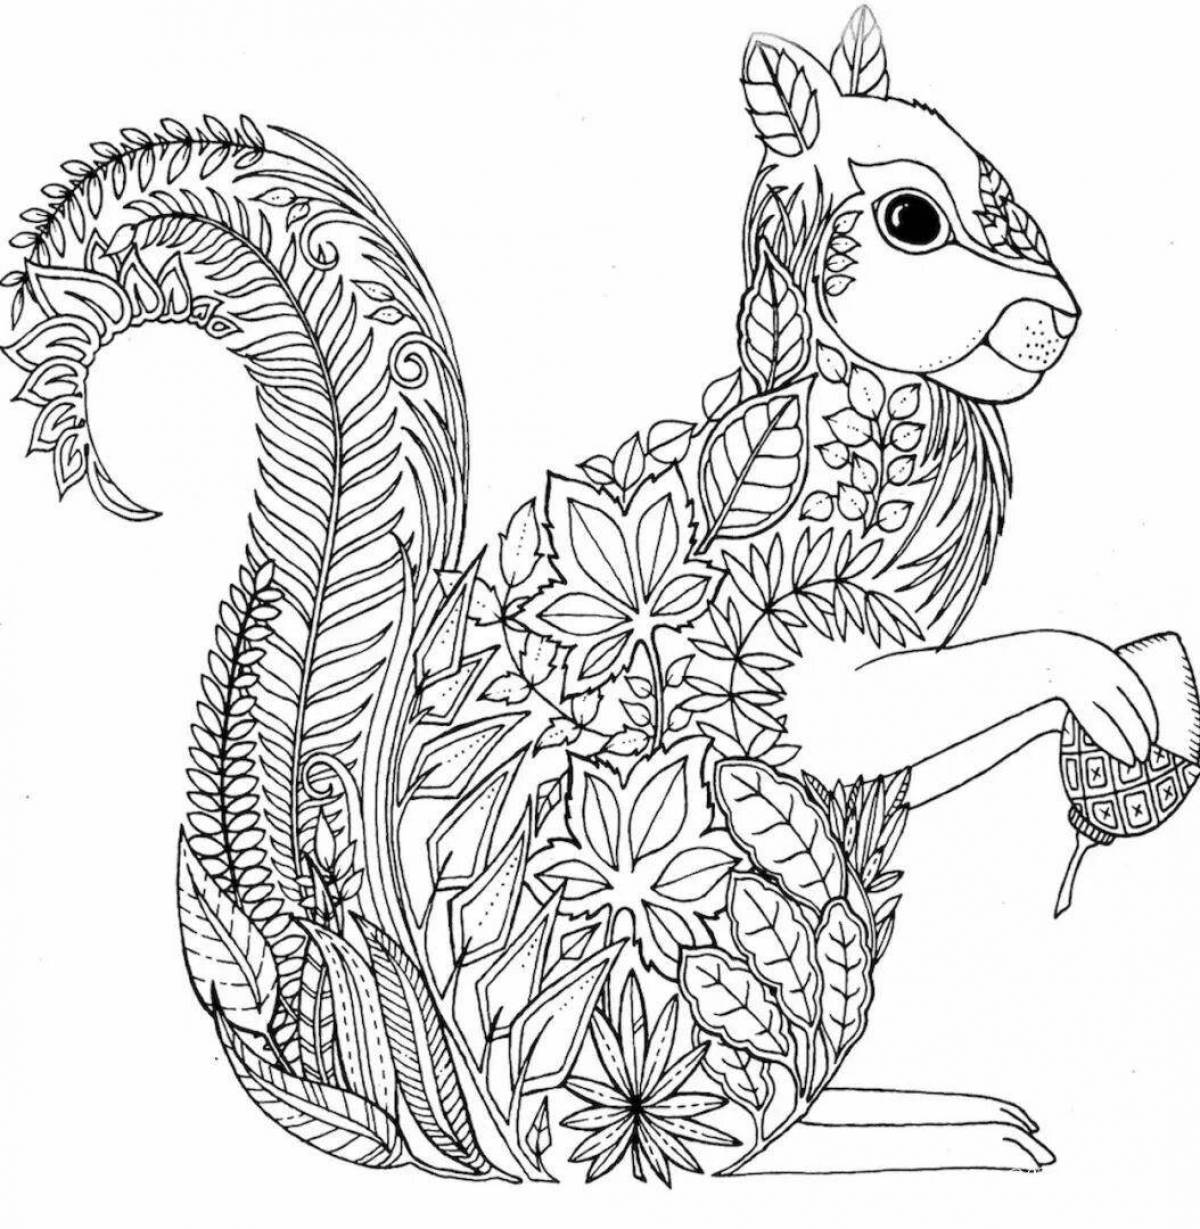 Luminous anti-stress animal coloring pages for kids